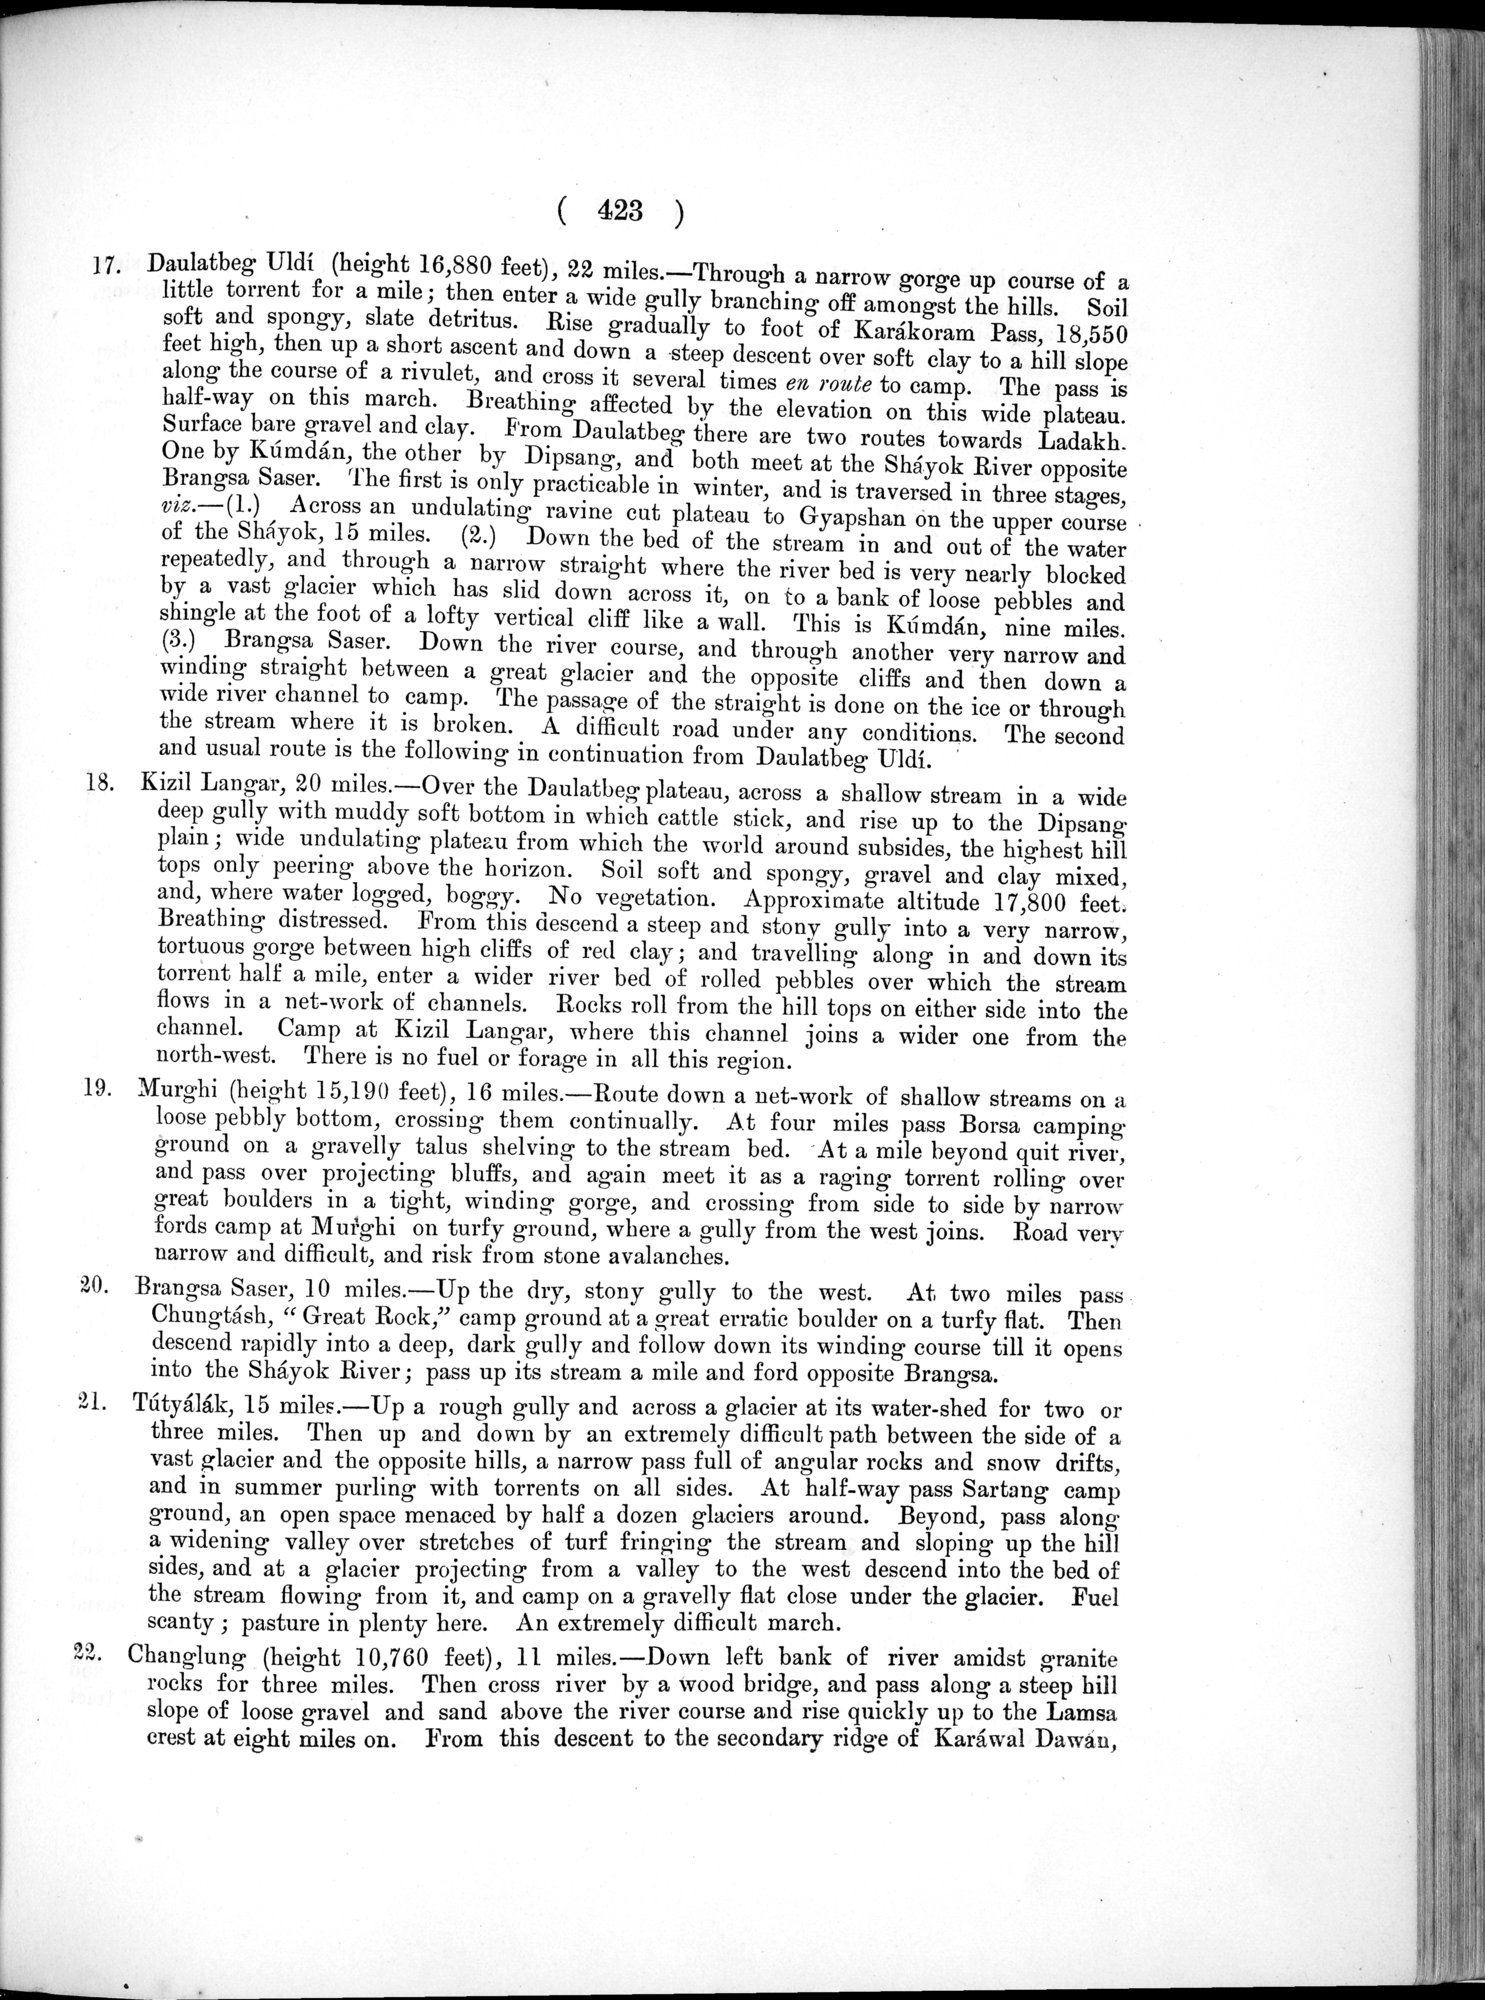 Report of a Mission to Yarkund in 1873 : vol.1 / Page 557 (Grayscale High Resolution Image)